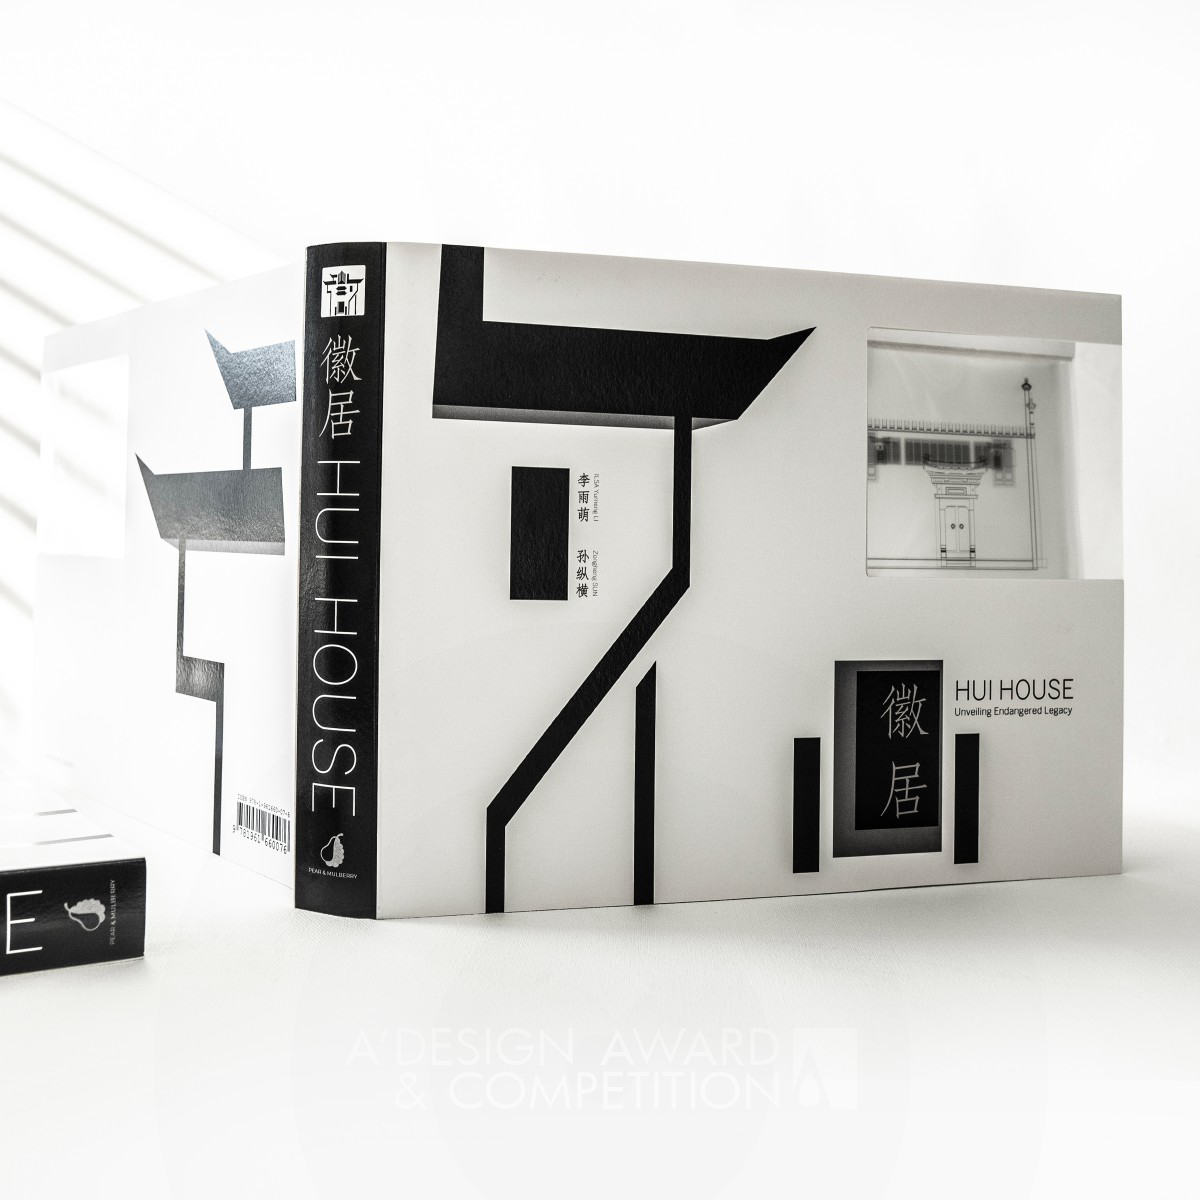 Hui House Architectural Exhibition Book